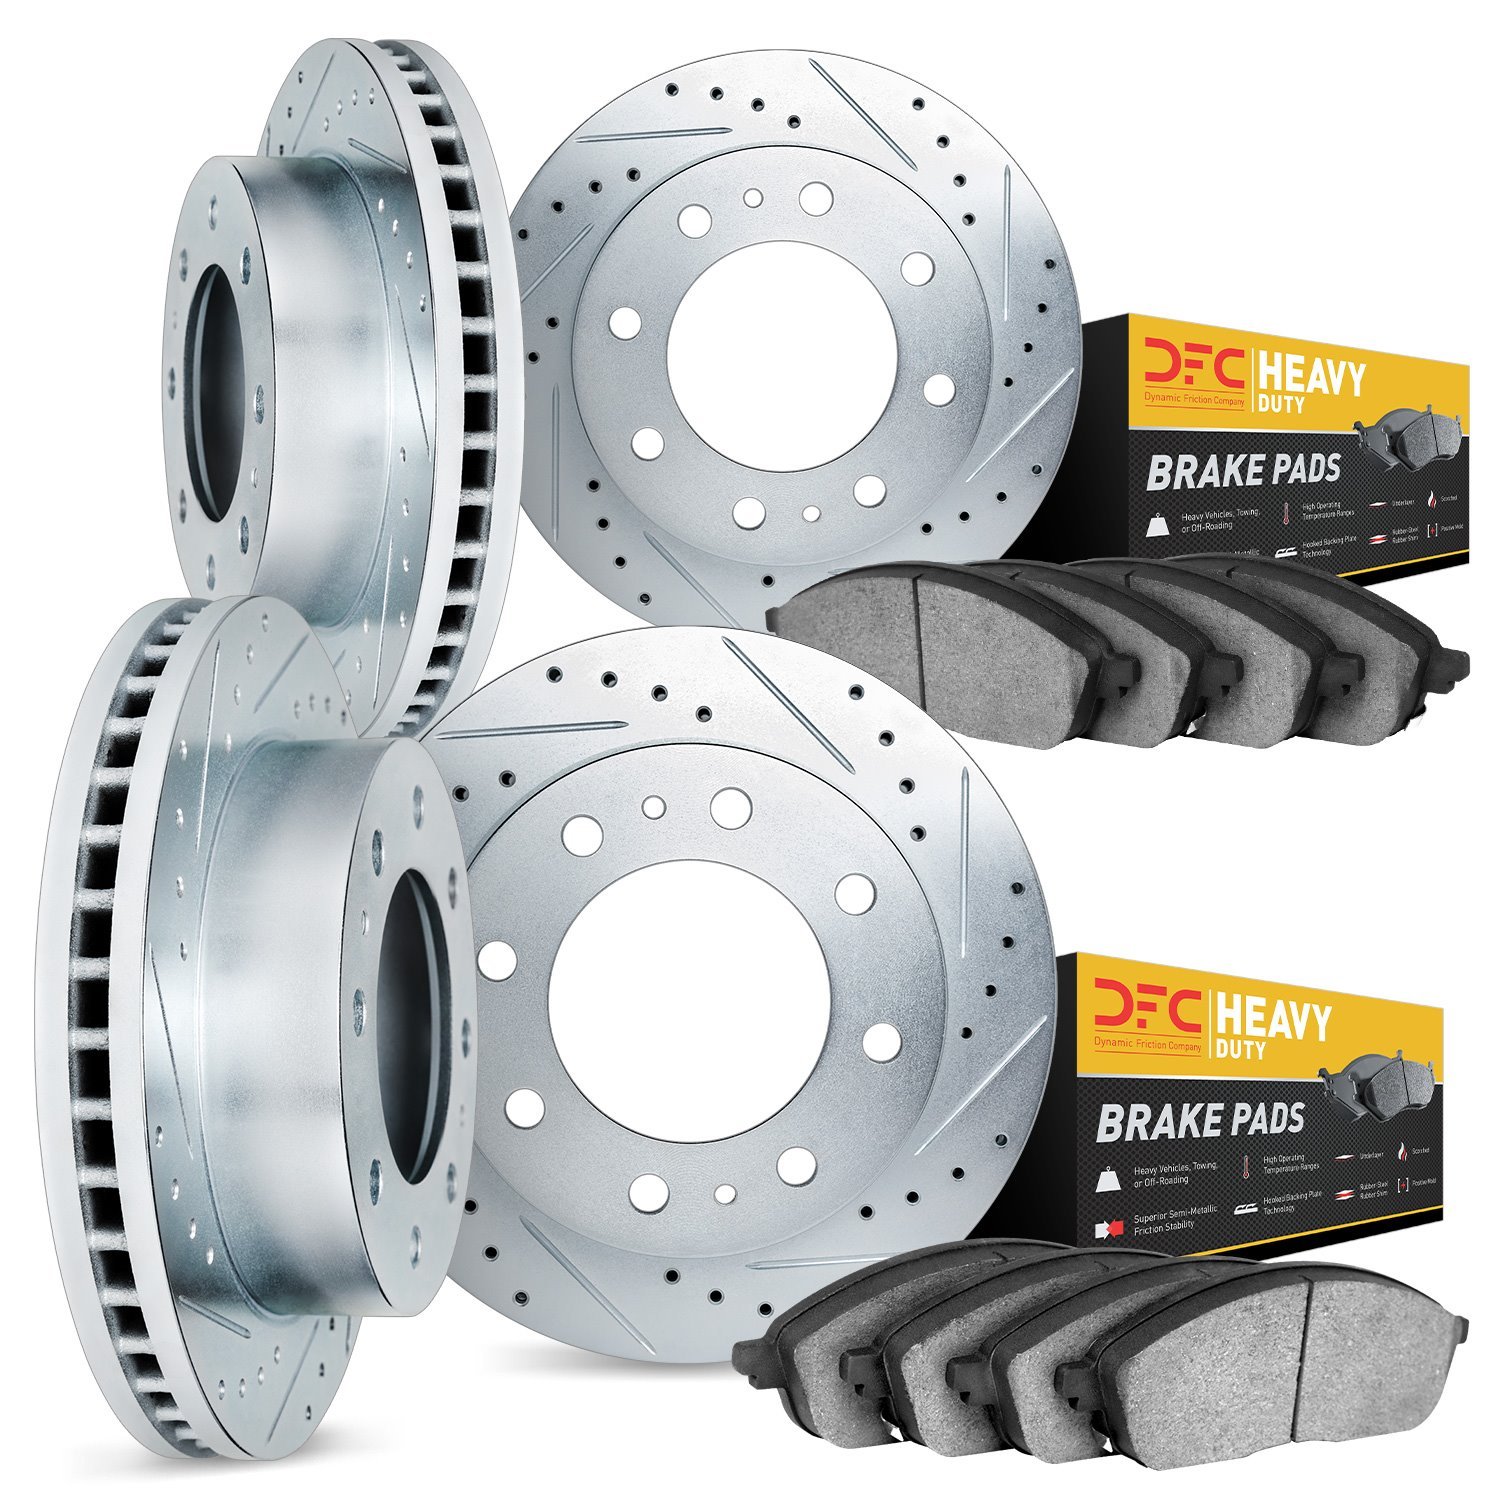 7204-99089 Drilled/Slotted Rotors w/Heavy-Duty Brake Pads Kit [Silver], 2010-2012 Ford/Lincoln/Mercury/Mazda, Position: Front an